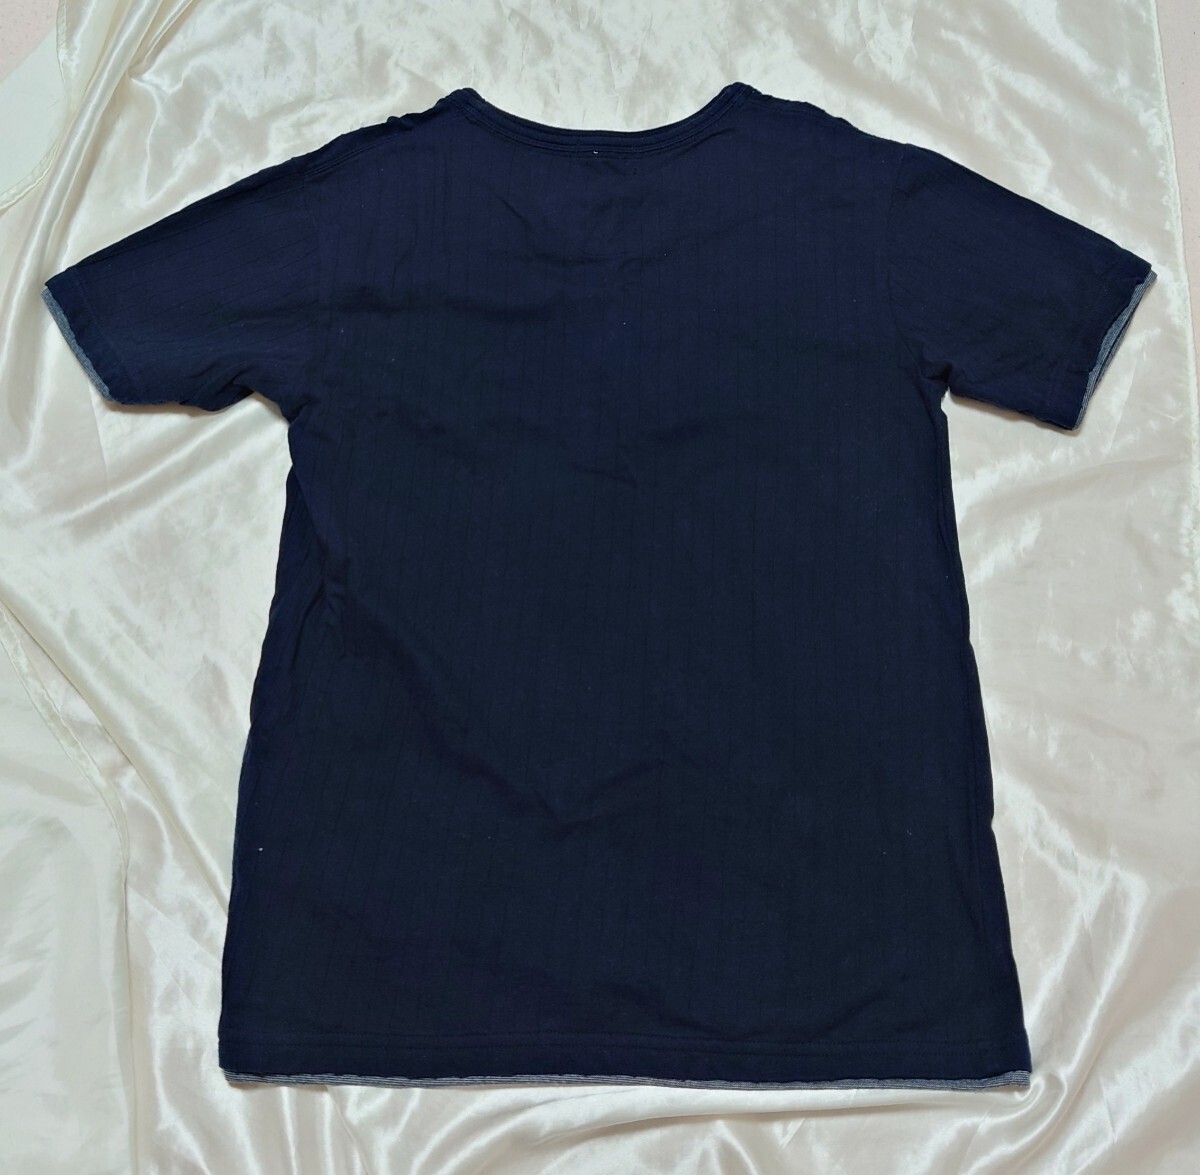  anonymity delivery THE SHOP TKMIXPICE L size cut and sewn shop TK navy navy blue cotton 100 T-shirt short sleeves cut and sewn 